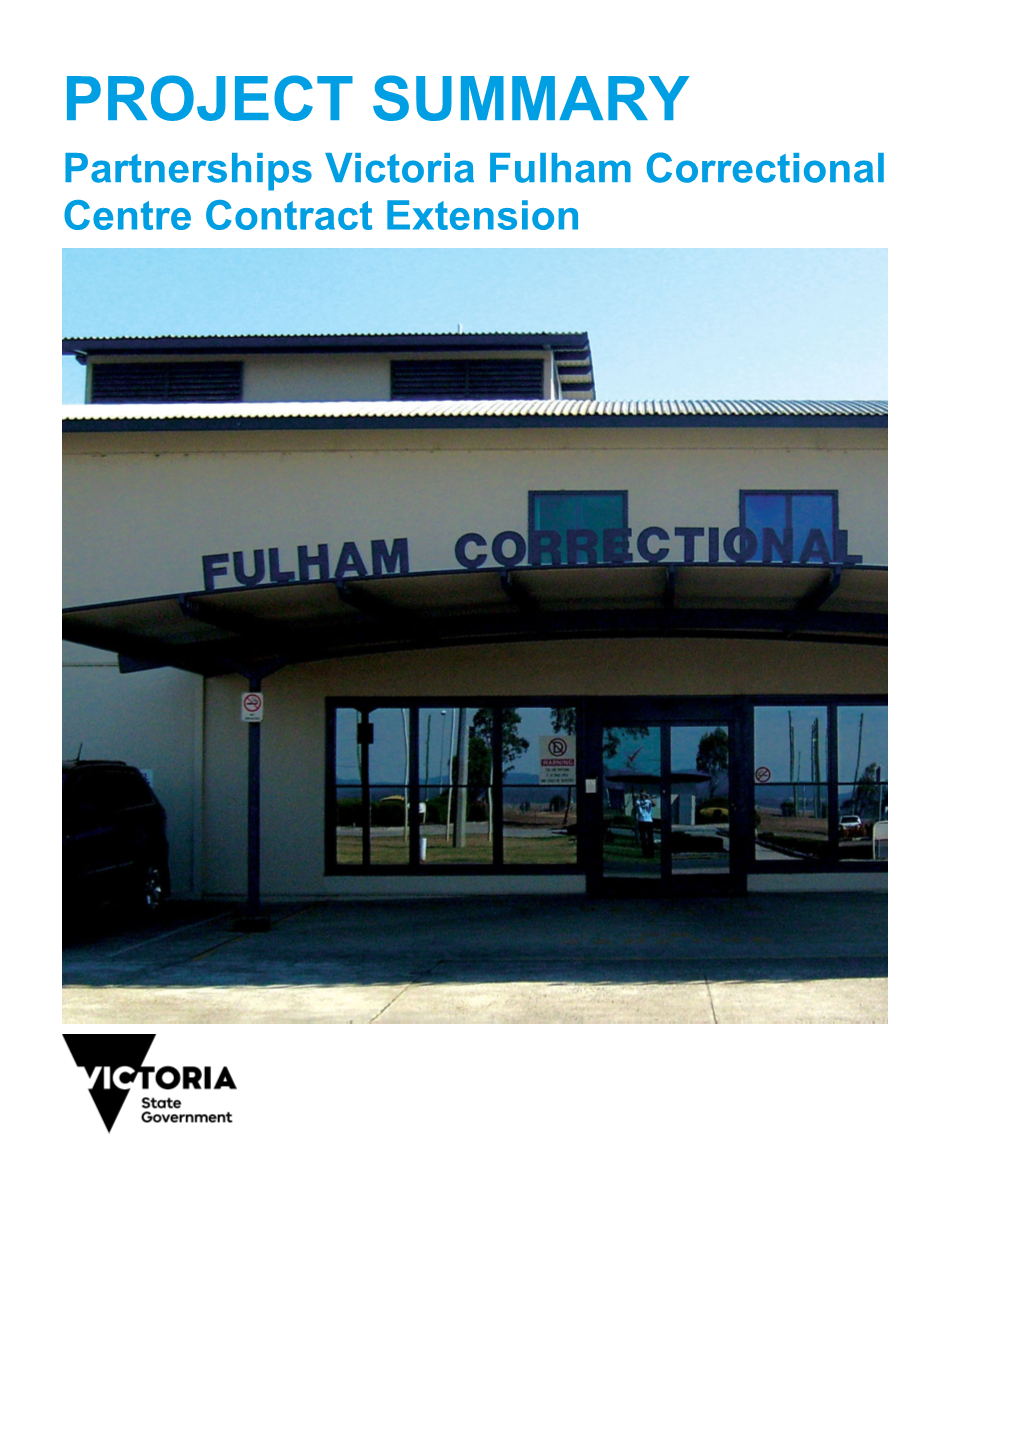 Project Summary Partnerships Victoria Fulham Correctional Centre Contract Extension